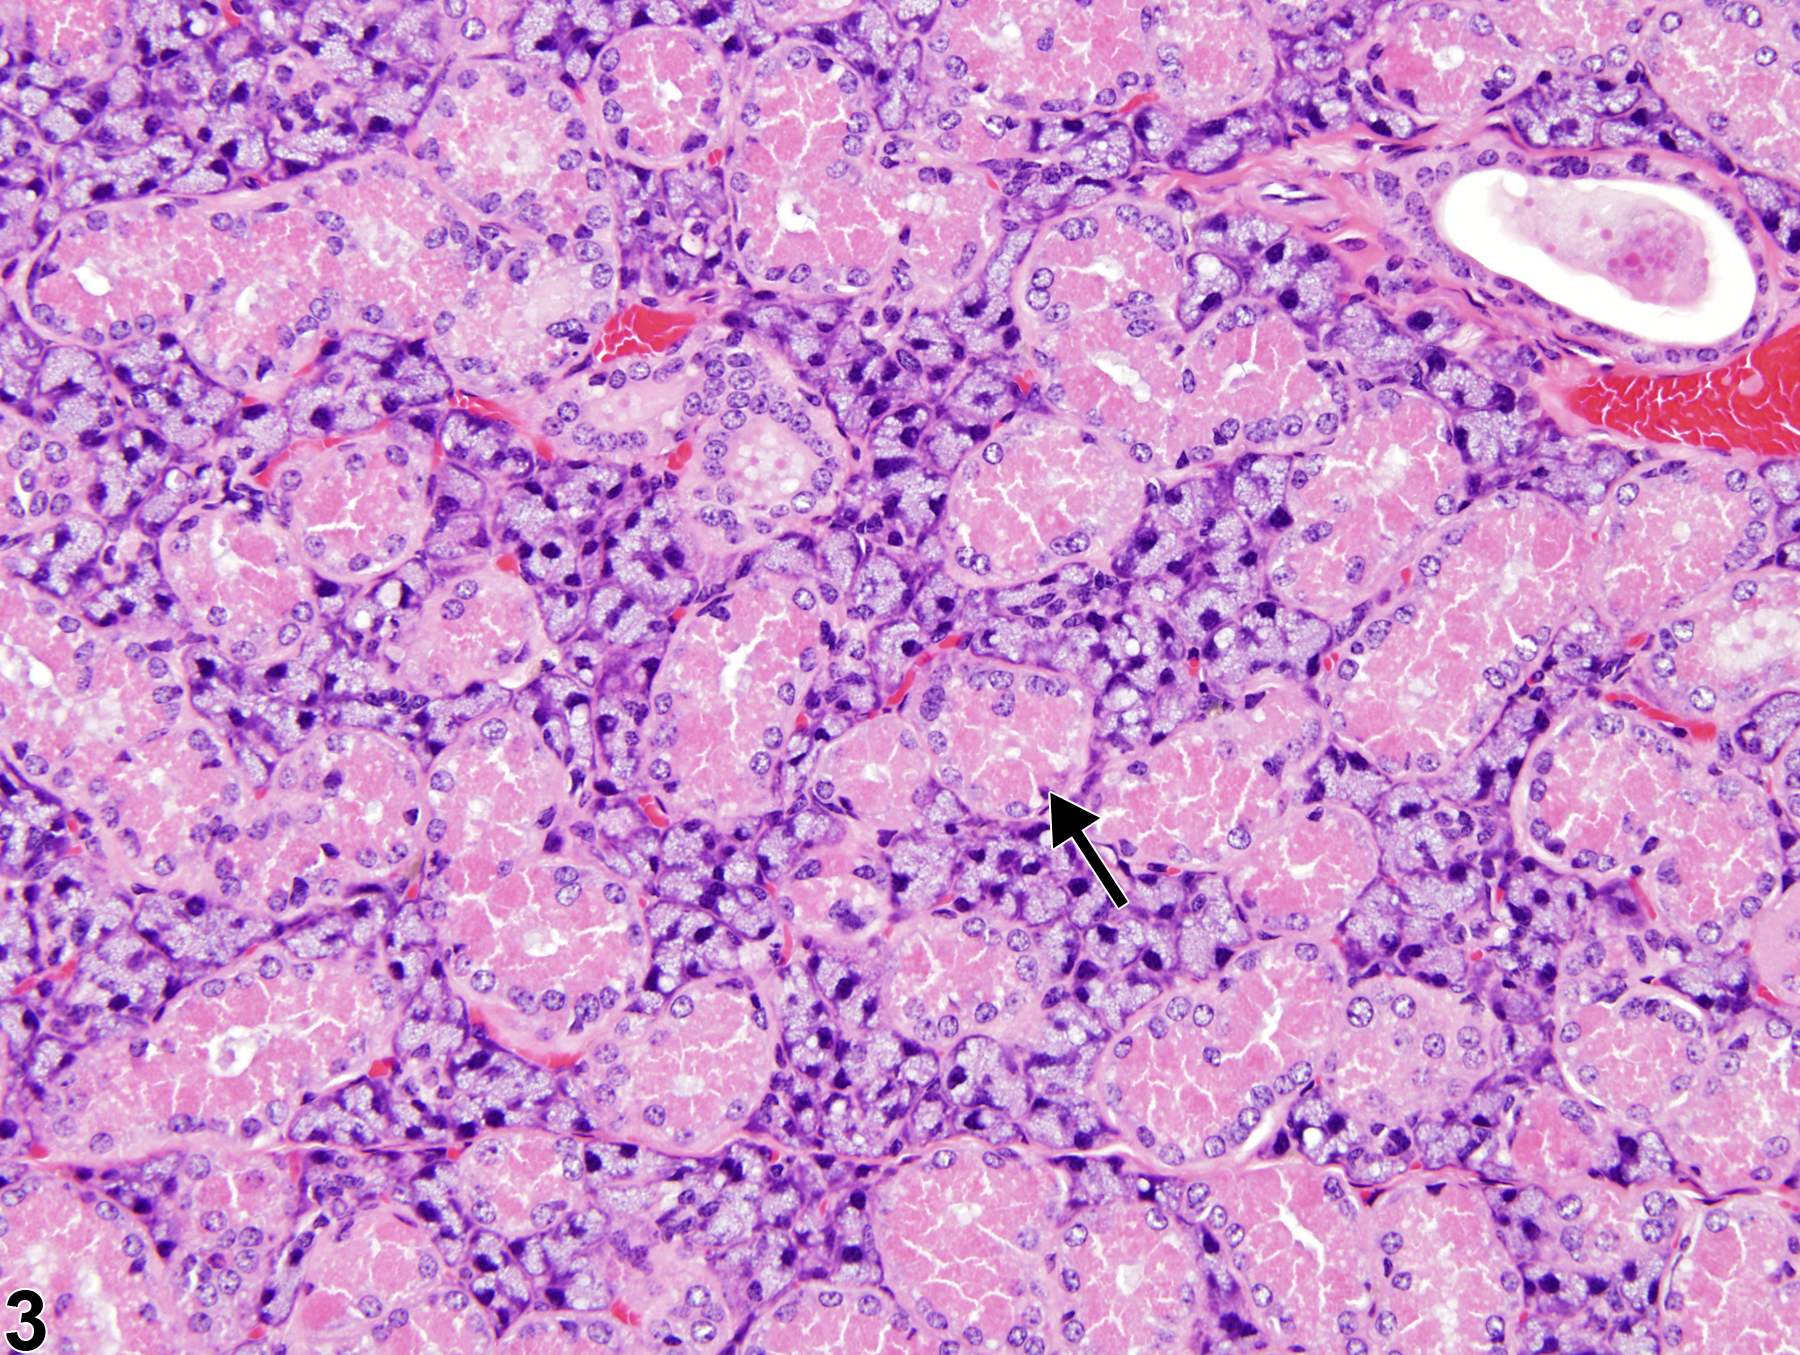 Image of cytoplasmic alteration in the submandibular salivary gland duct from a female B6C3F1 mouse in a chronic study